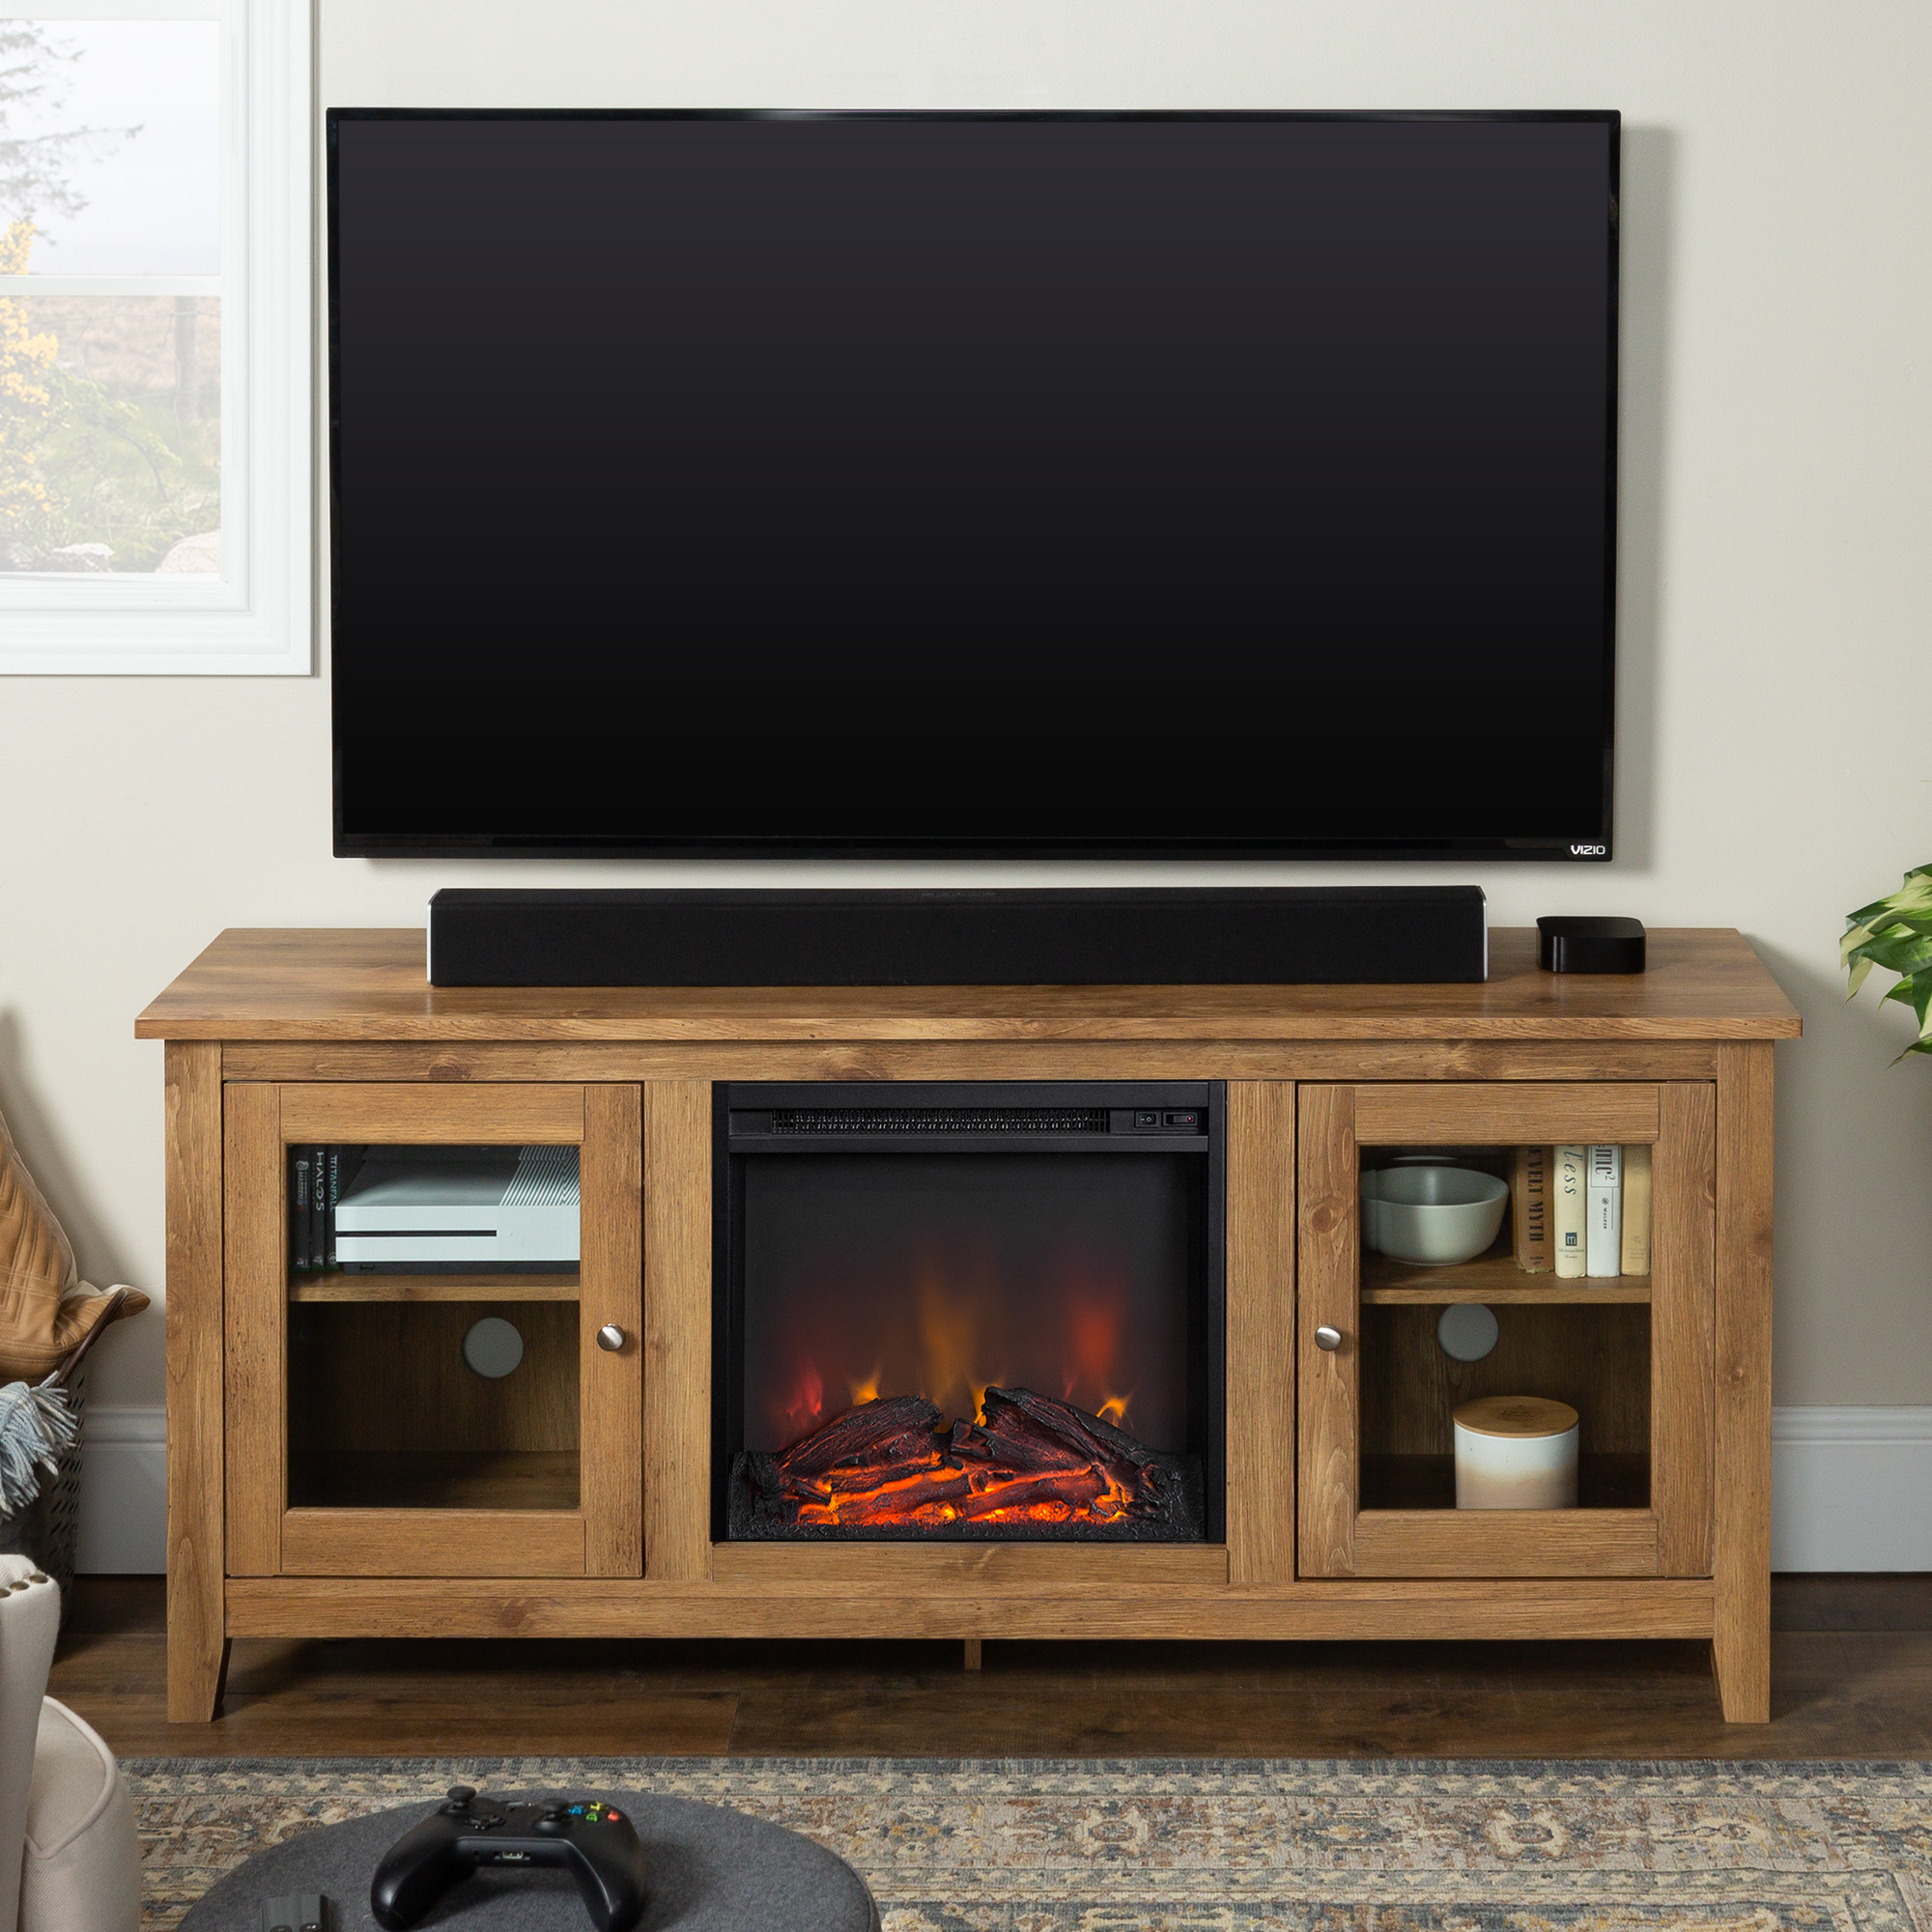 Walker Edison Barn wood Fireplace TV Stand for TVs up to 60" - image 1 of 10